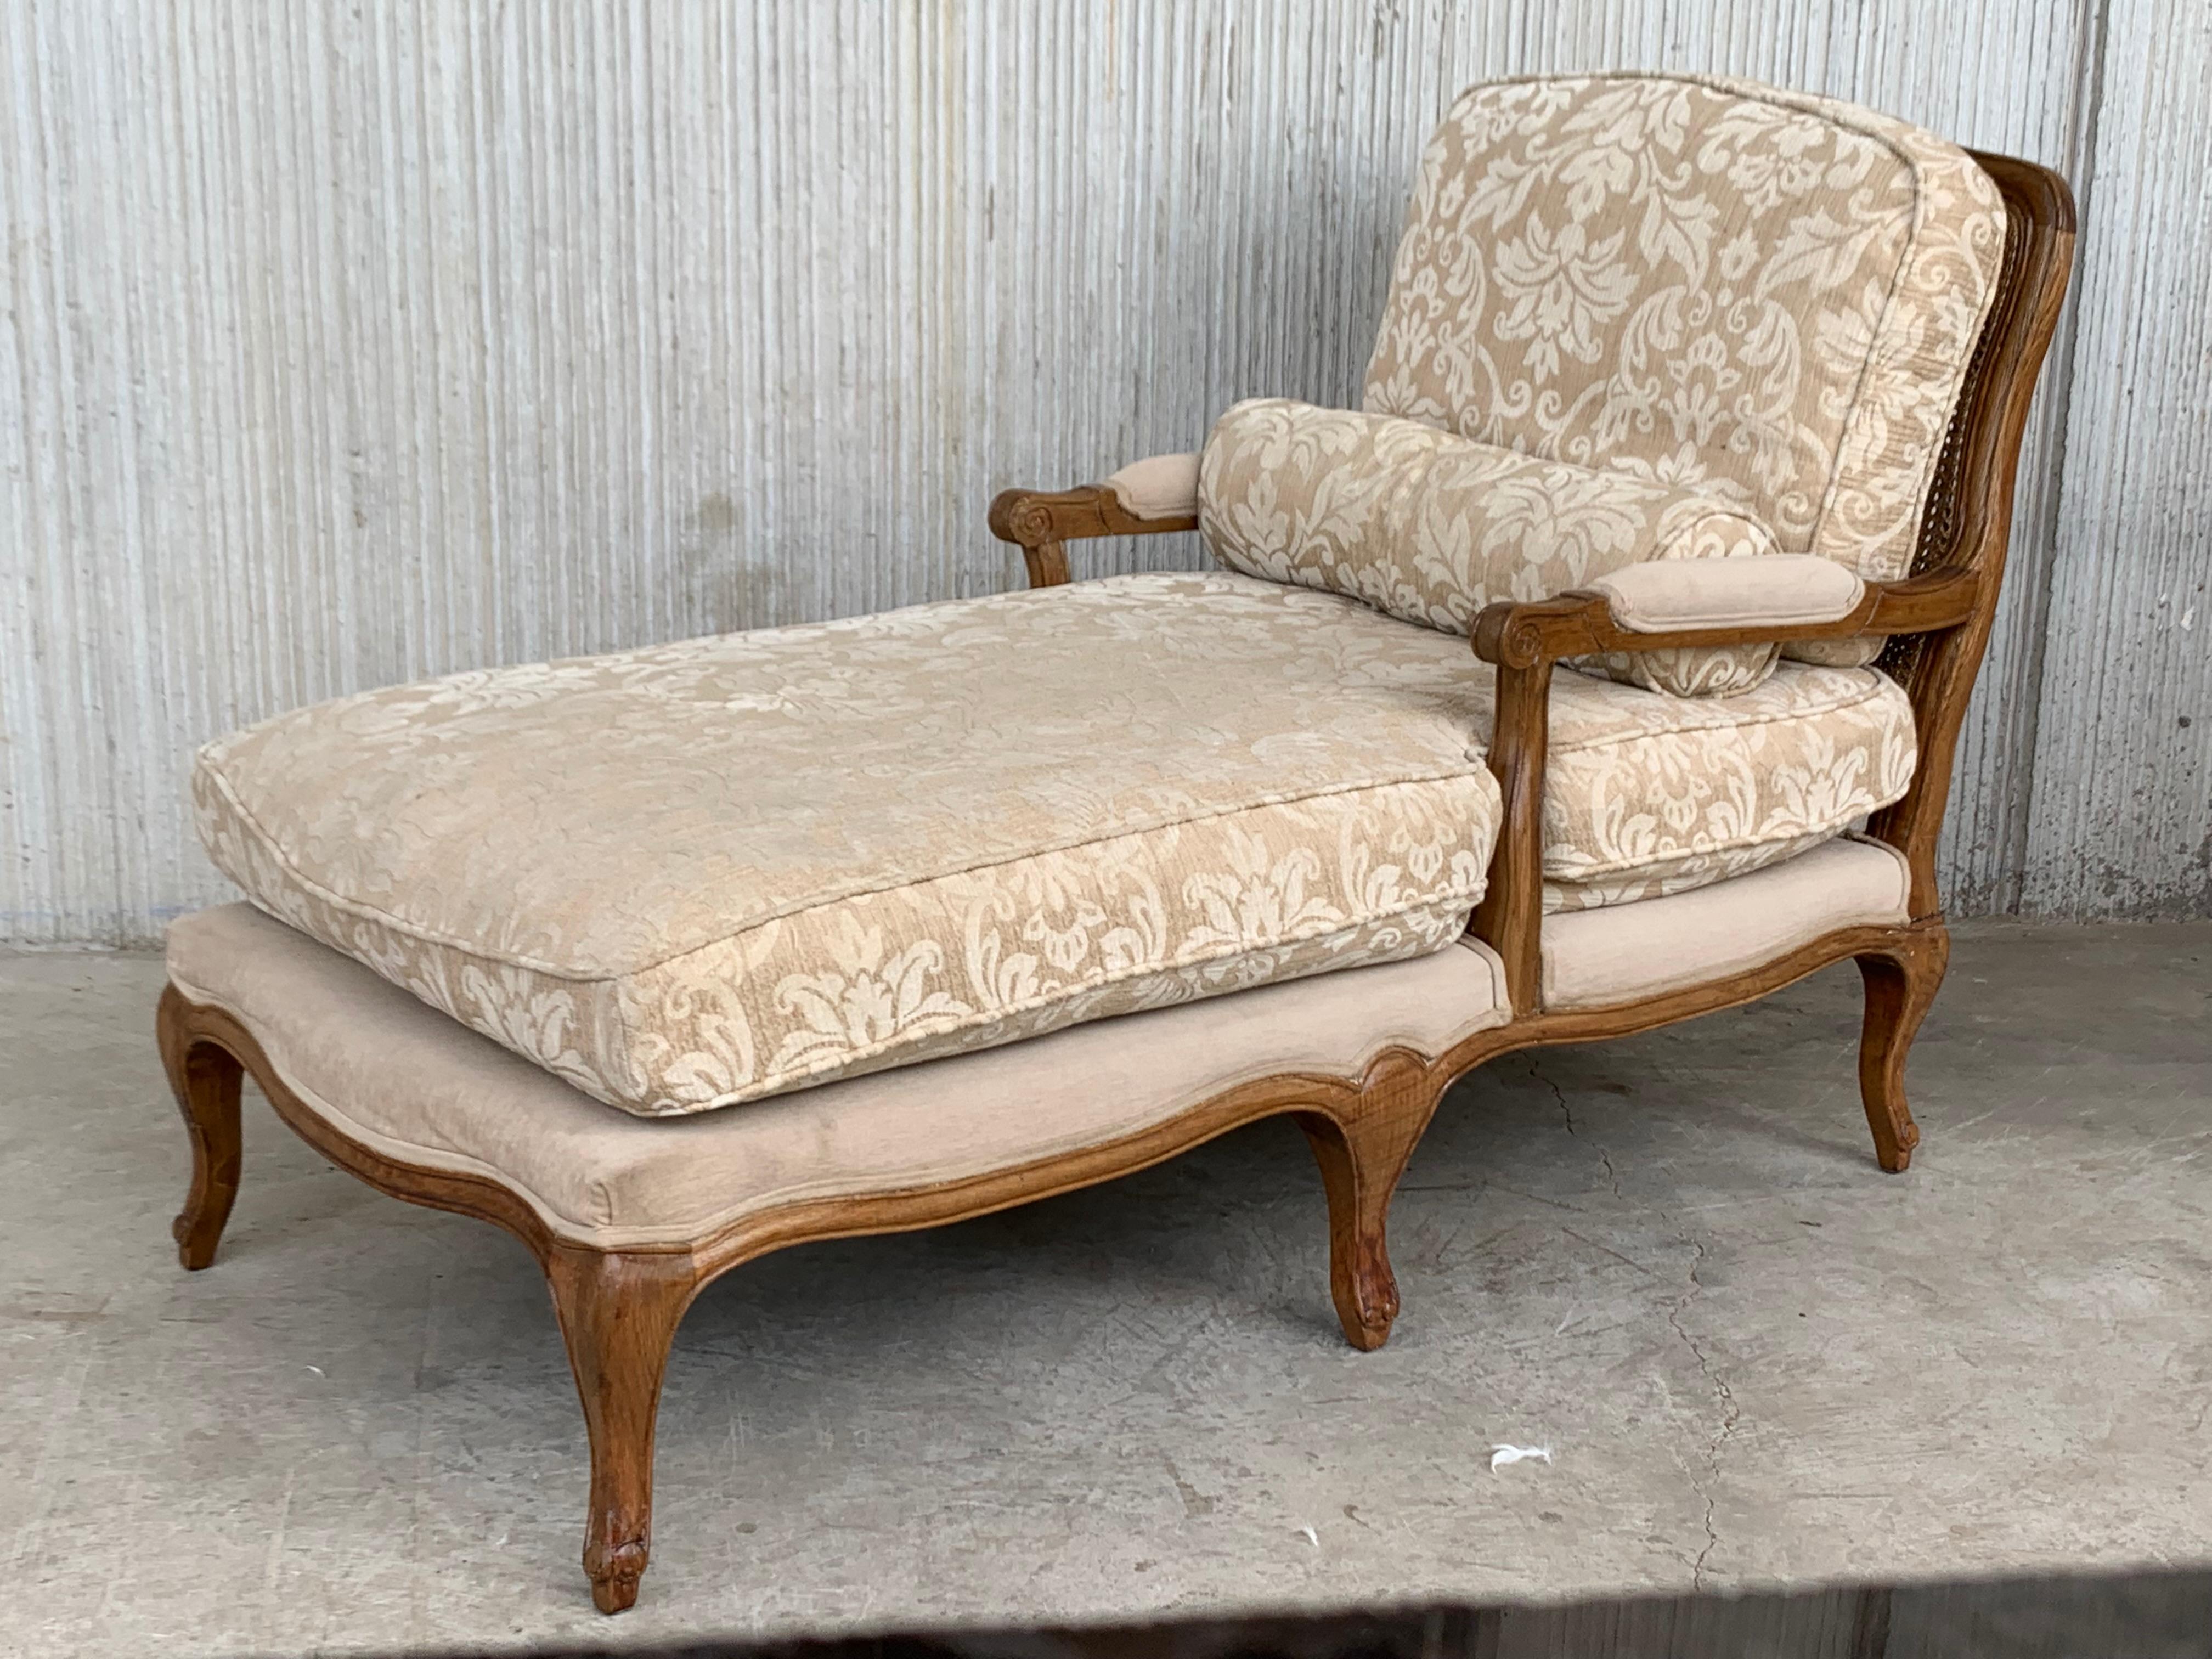 Early 20th century French Louis XV carved walnut chase longue with cane back

Crafted in France circa 1920, the fruitwood baroque chaise longue sits on four cabriole legs, and has a scalloped apron decorated . The walnut chase has an on-trend cane